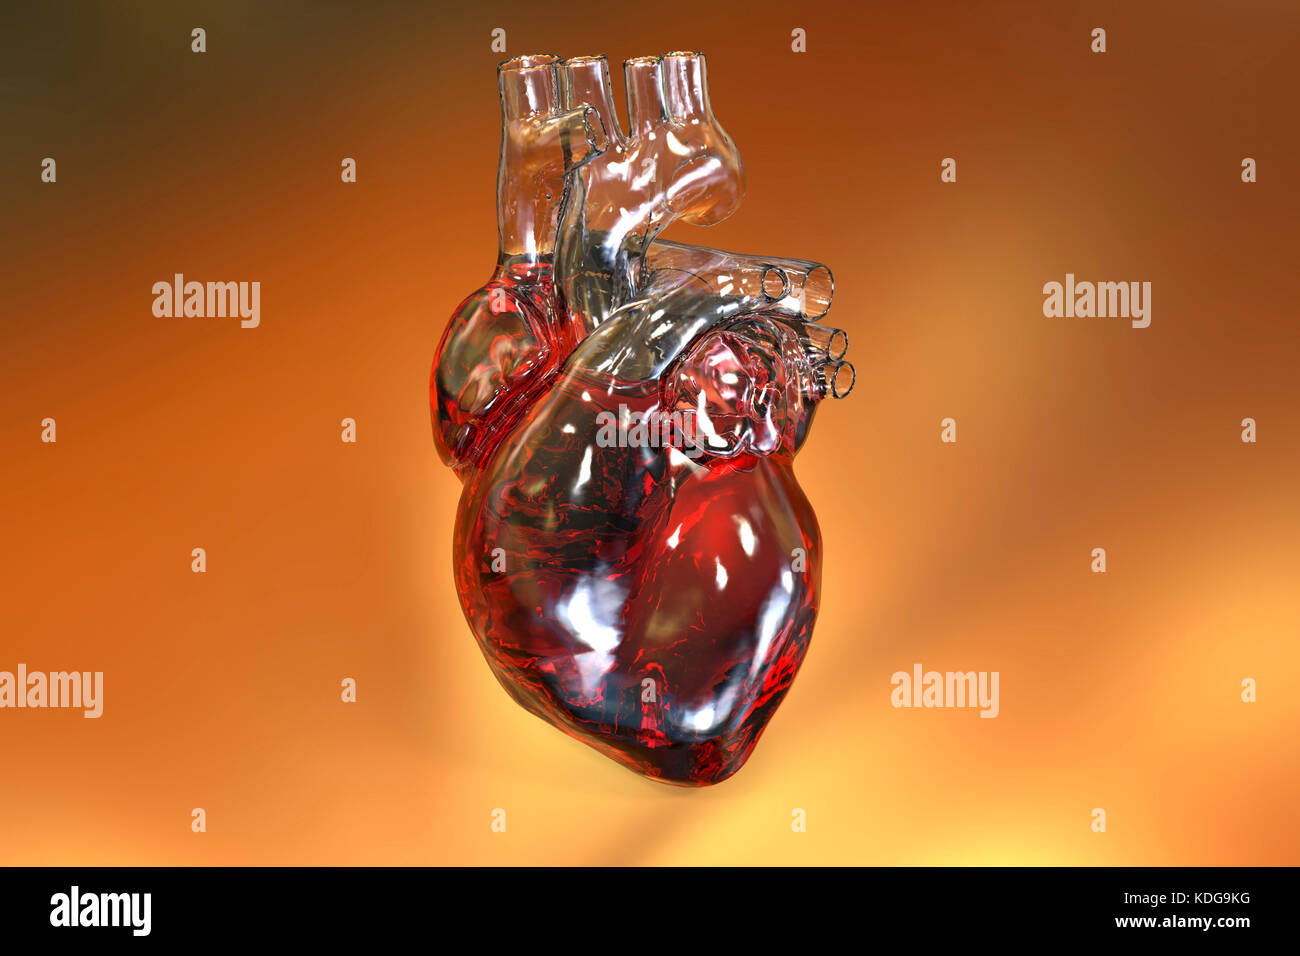 Computer illustration of the heart with coronary vessels. Stock Photo